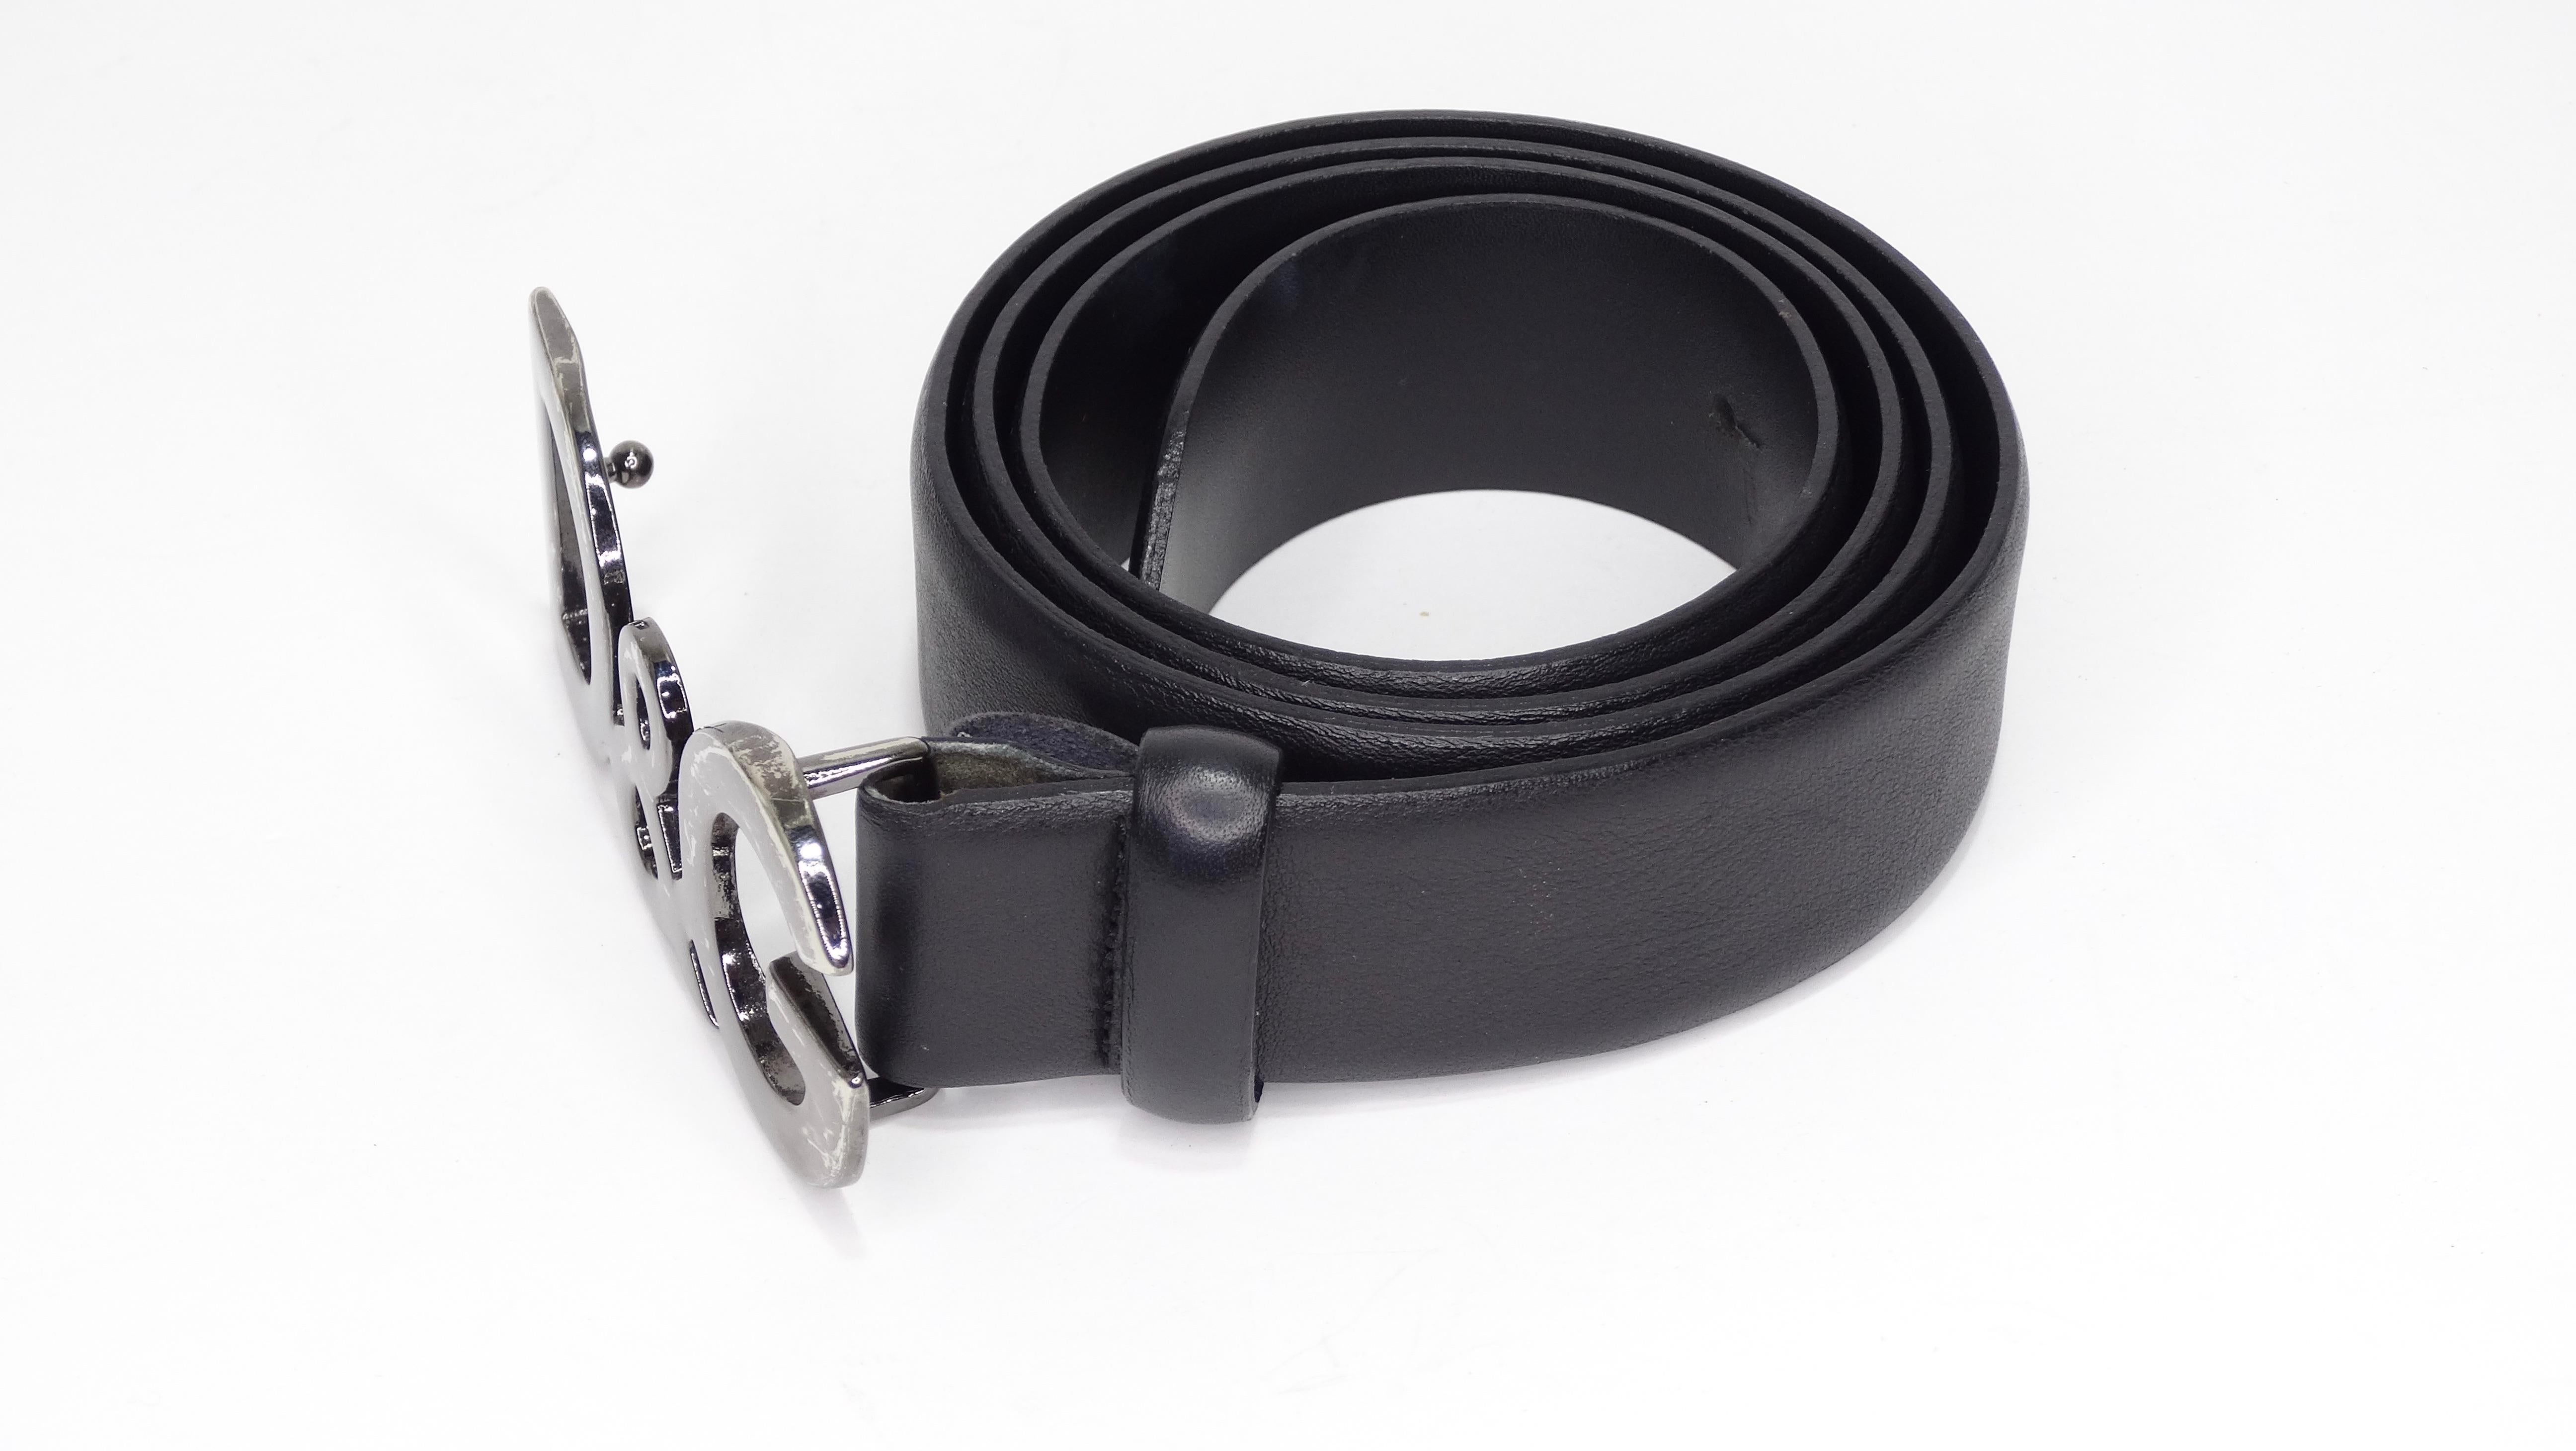 Circa 2000s, this Dolce & Gabbana belt is a staple for your closet! Made from smooth black leather, this belt features a gun metal D&G buckle with a peg closure. Perfect to wear with your favorite Levi's and bodysuit! Wear on buckle 